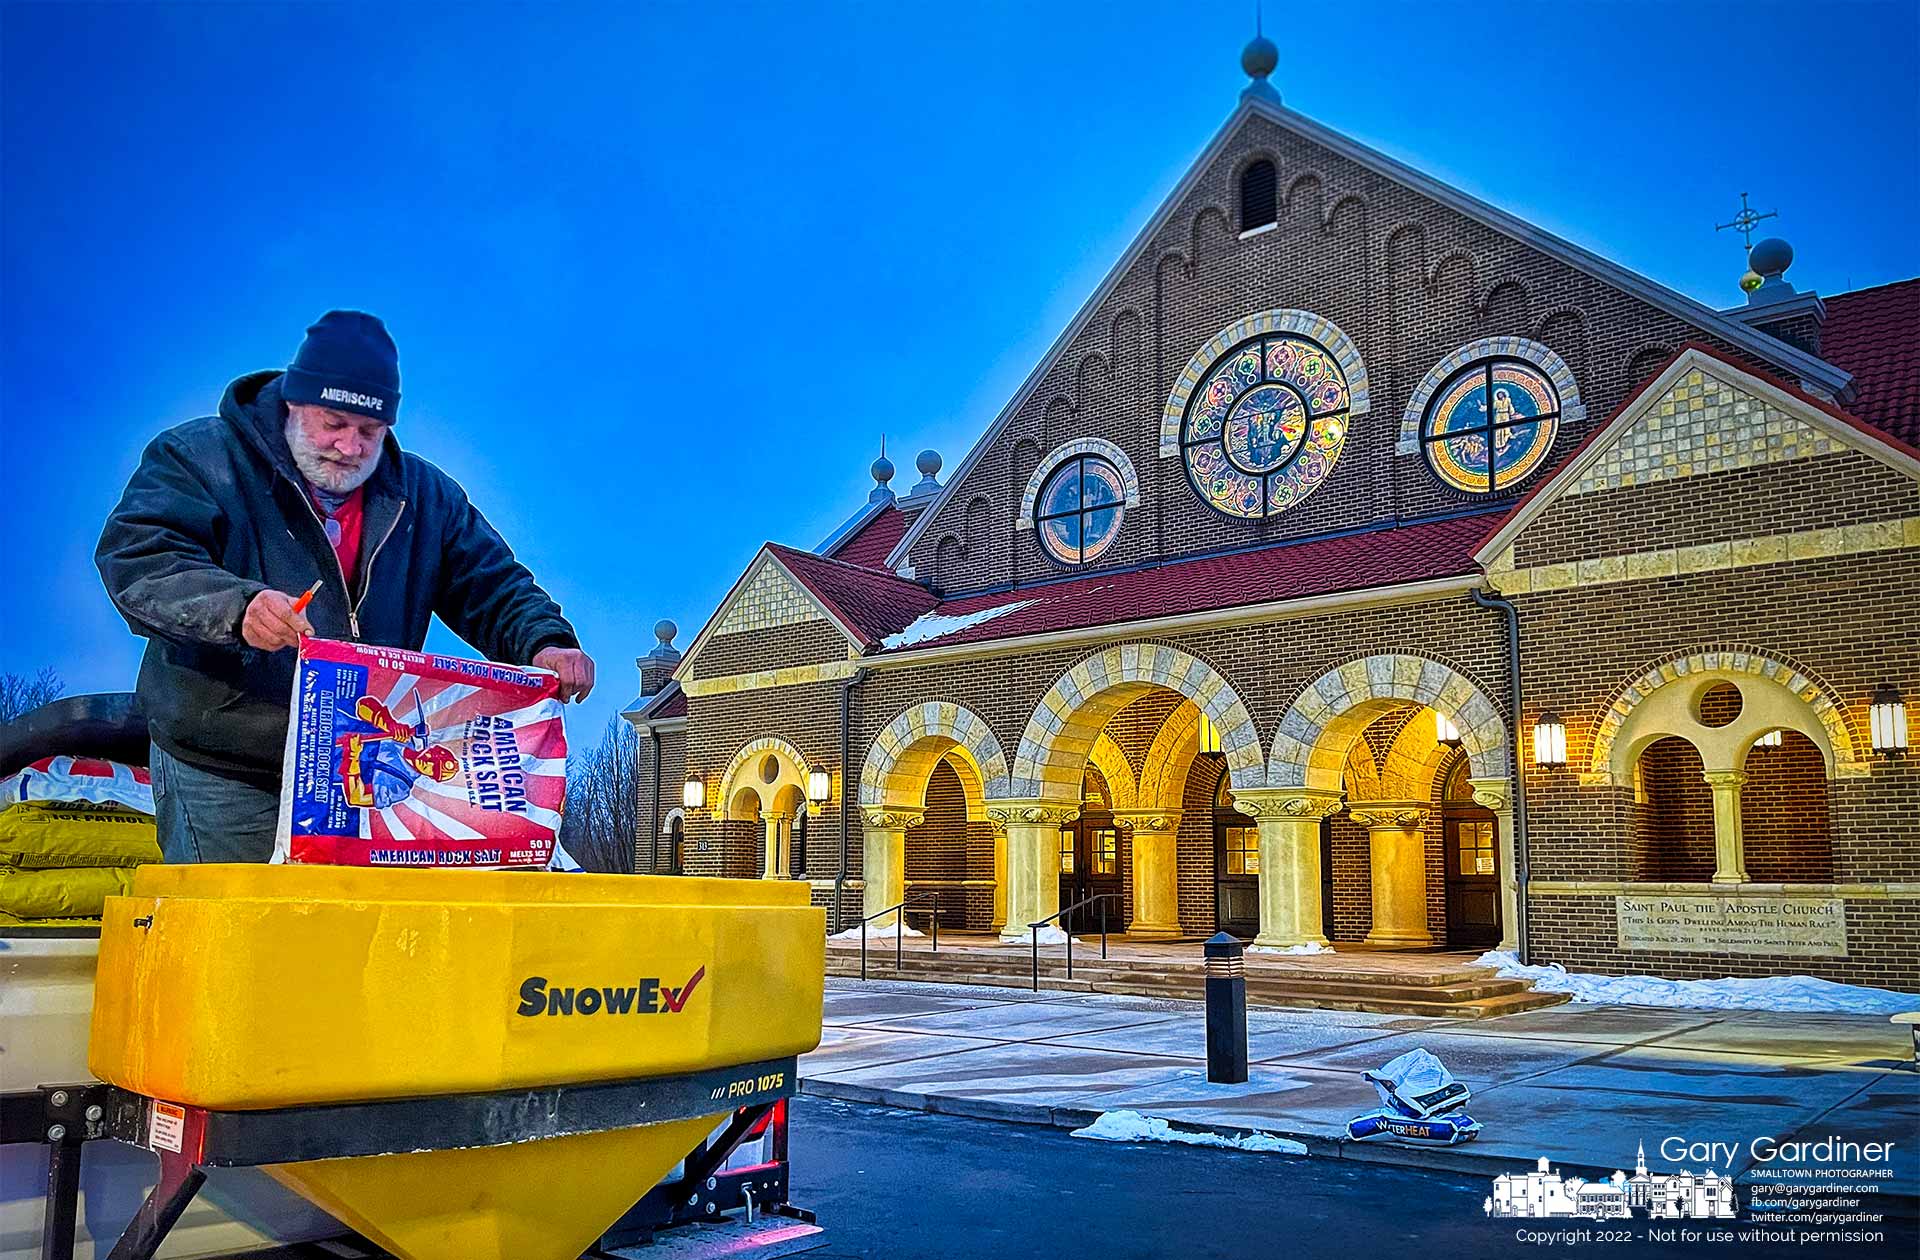 A worker loads salt into a spreader in front of St. Paul the Apostle Catholic Church in preparation for clearing snow and ice before the first Mass on Sunday. My Final Photo for Jan. 23, 2022.